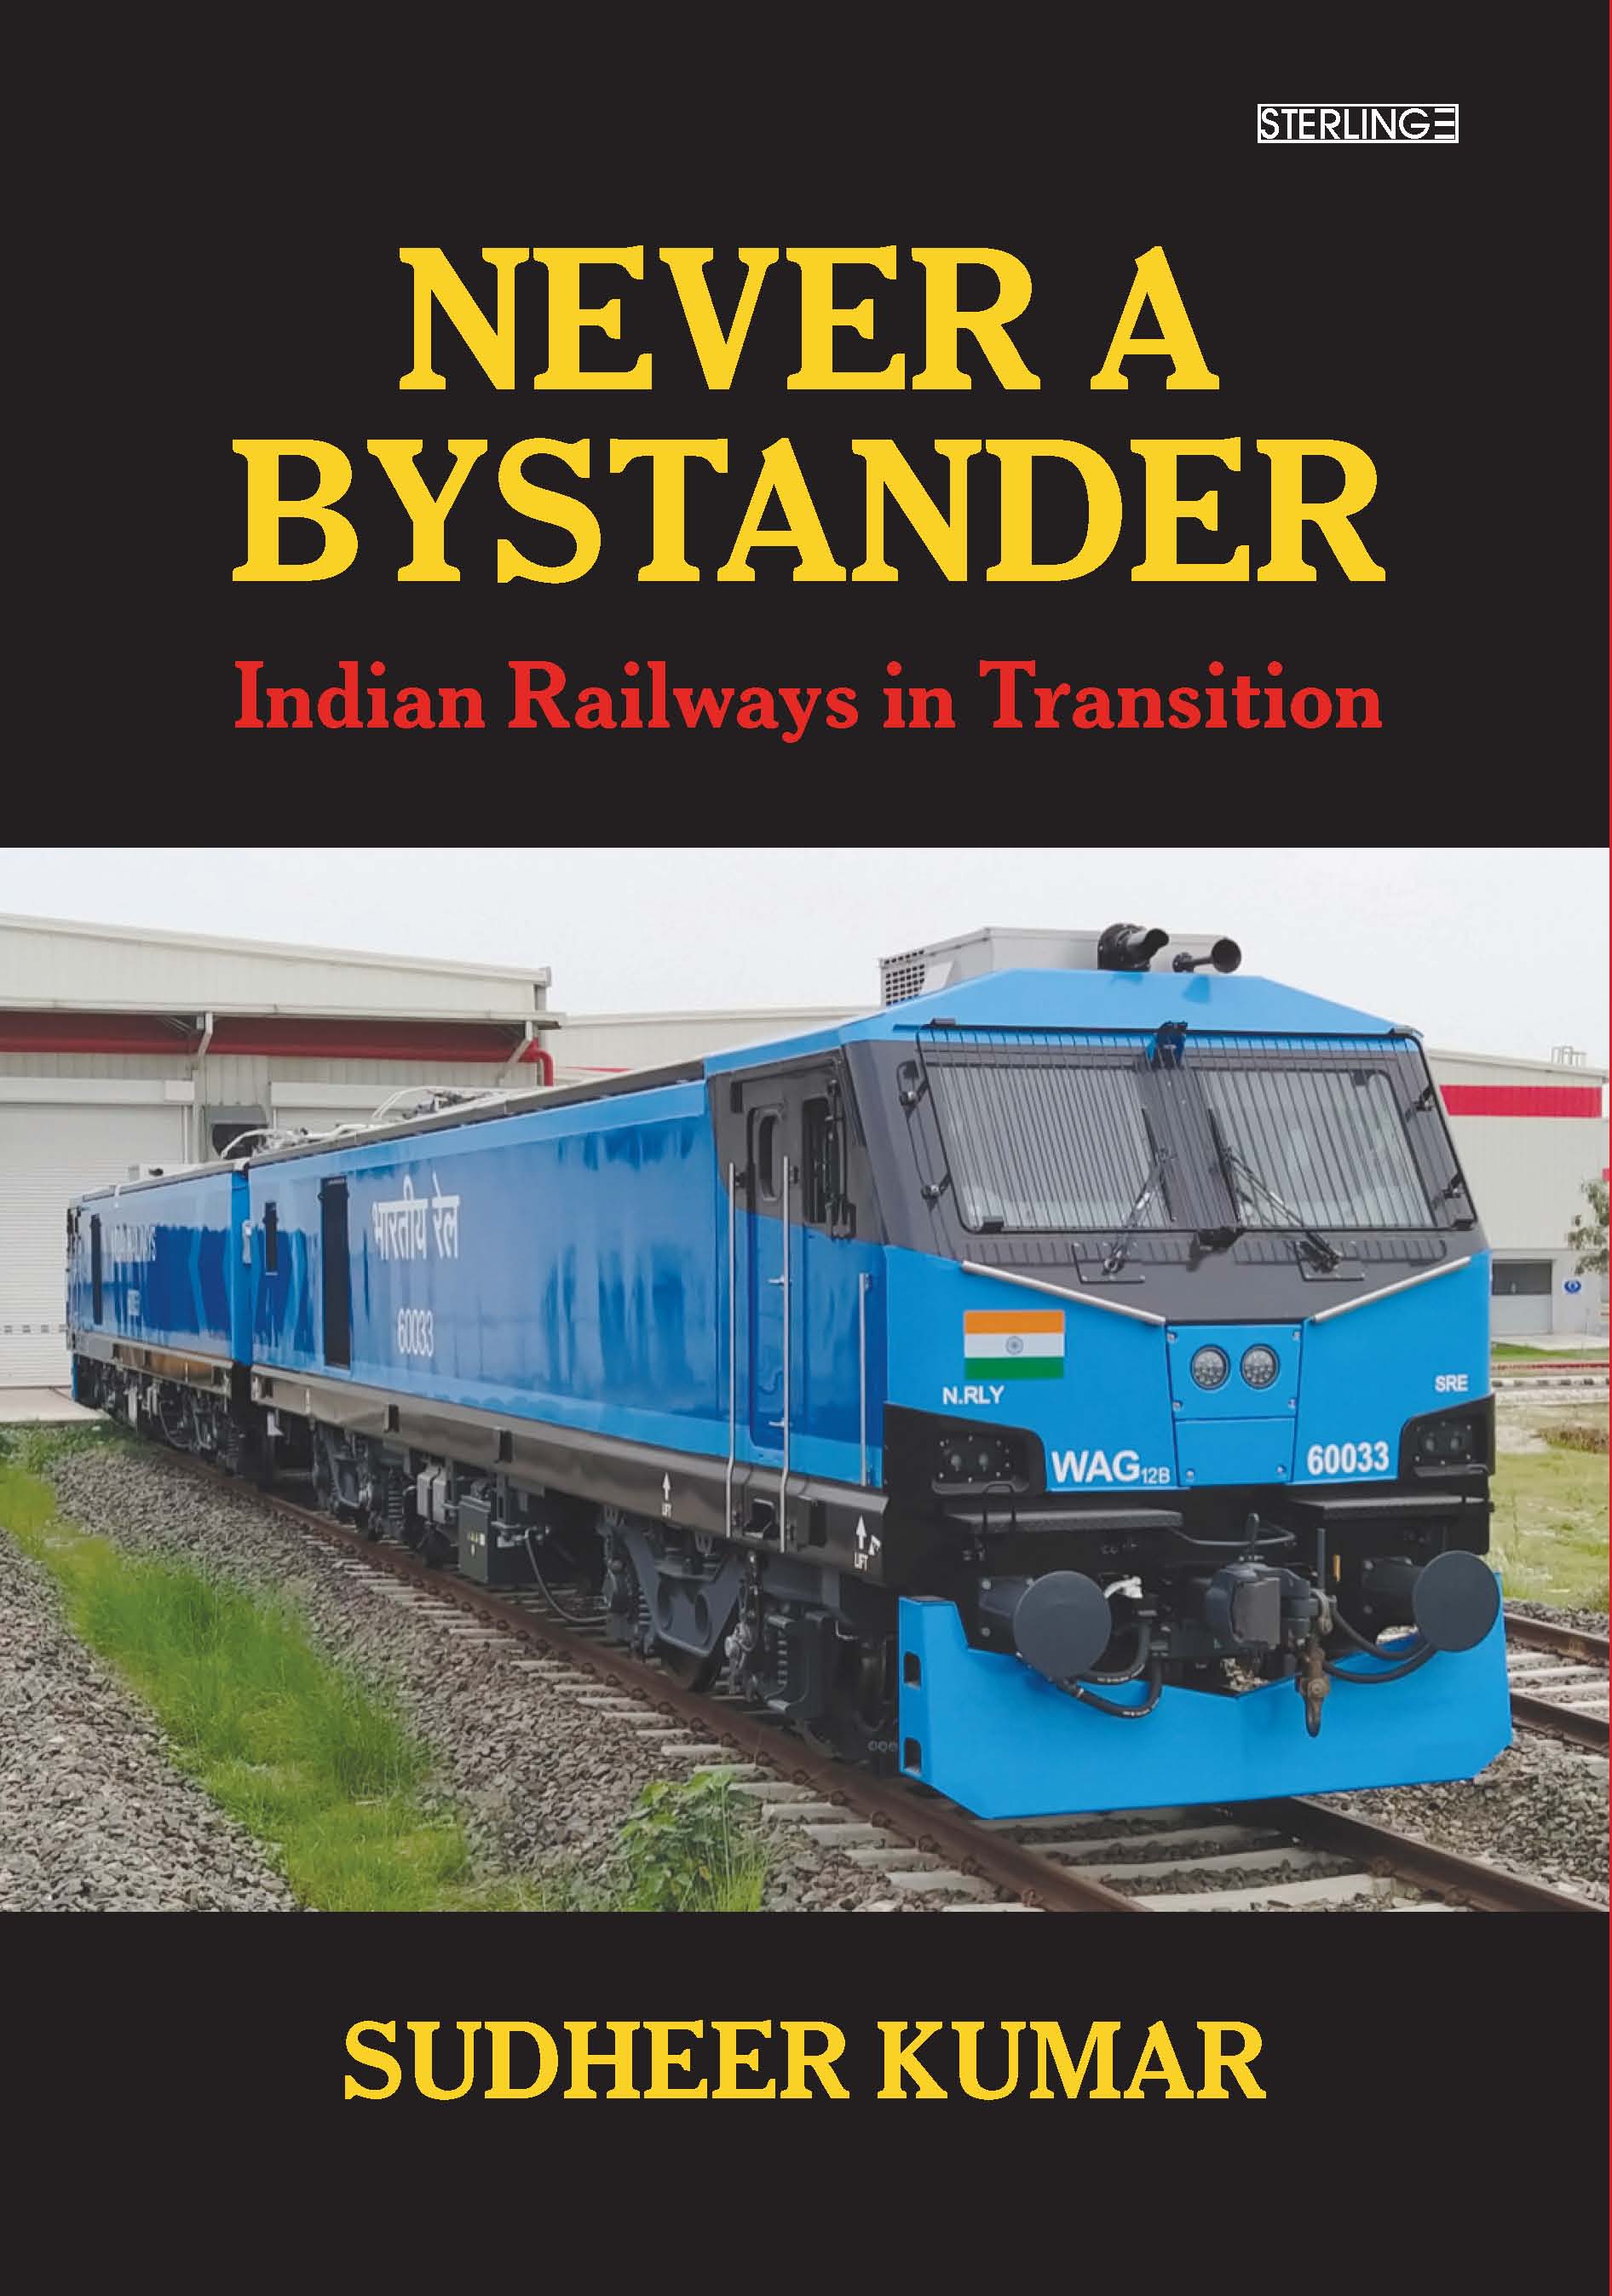 NEVER A BYSTANDER: INDIAN RAILWAYS IN TRANSITION